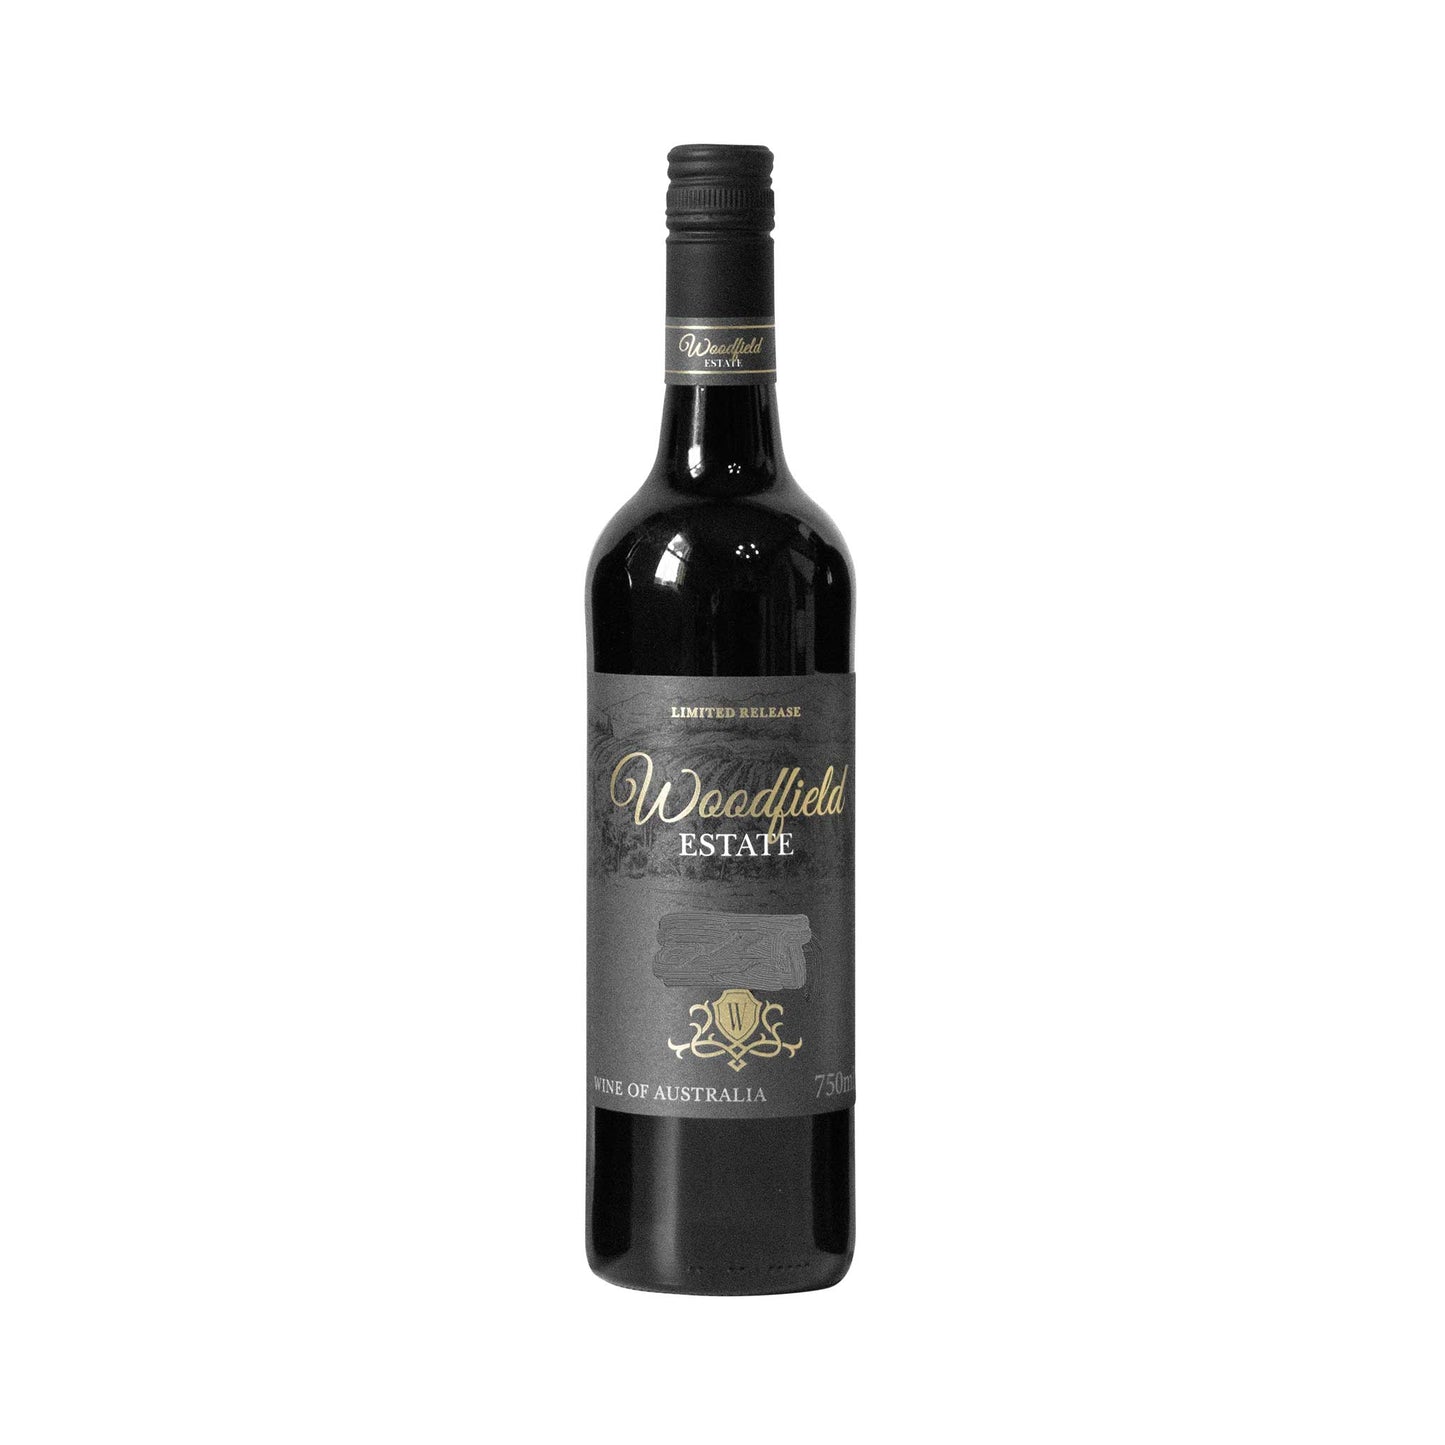 Woodfield Estate 'Limited Release' Yarra Valley Cabernet Shiraz 2019 - Frankies Pantry and Cellar